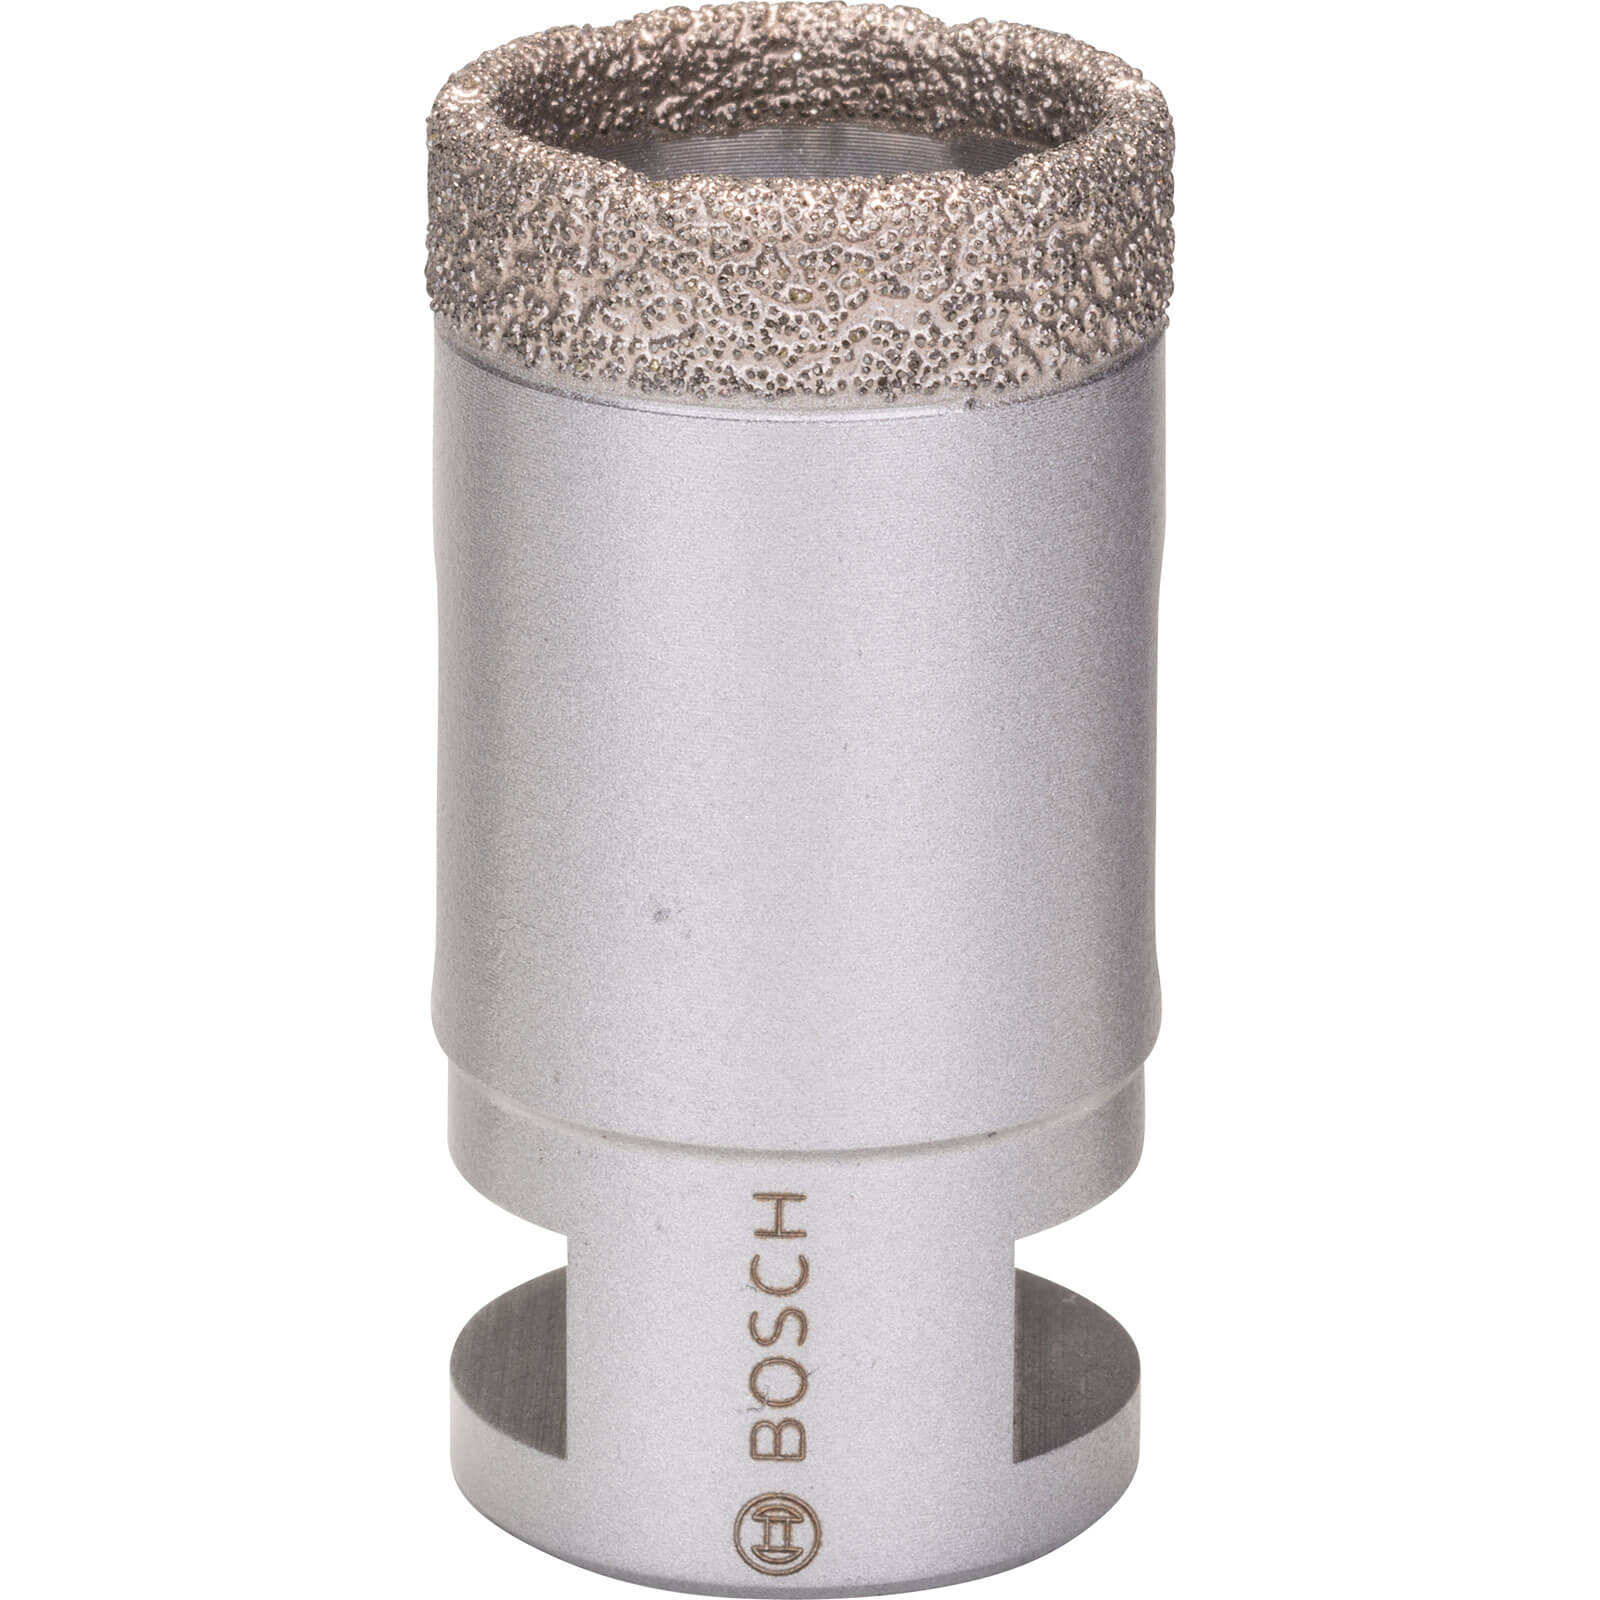 Image of Bosch Angle Grinder Dry Diamond Hole Cutter For Ceramics 32mm